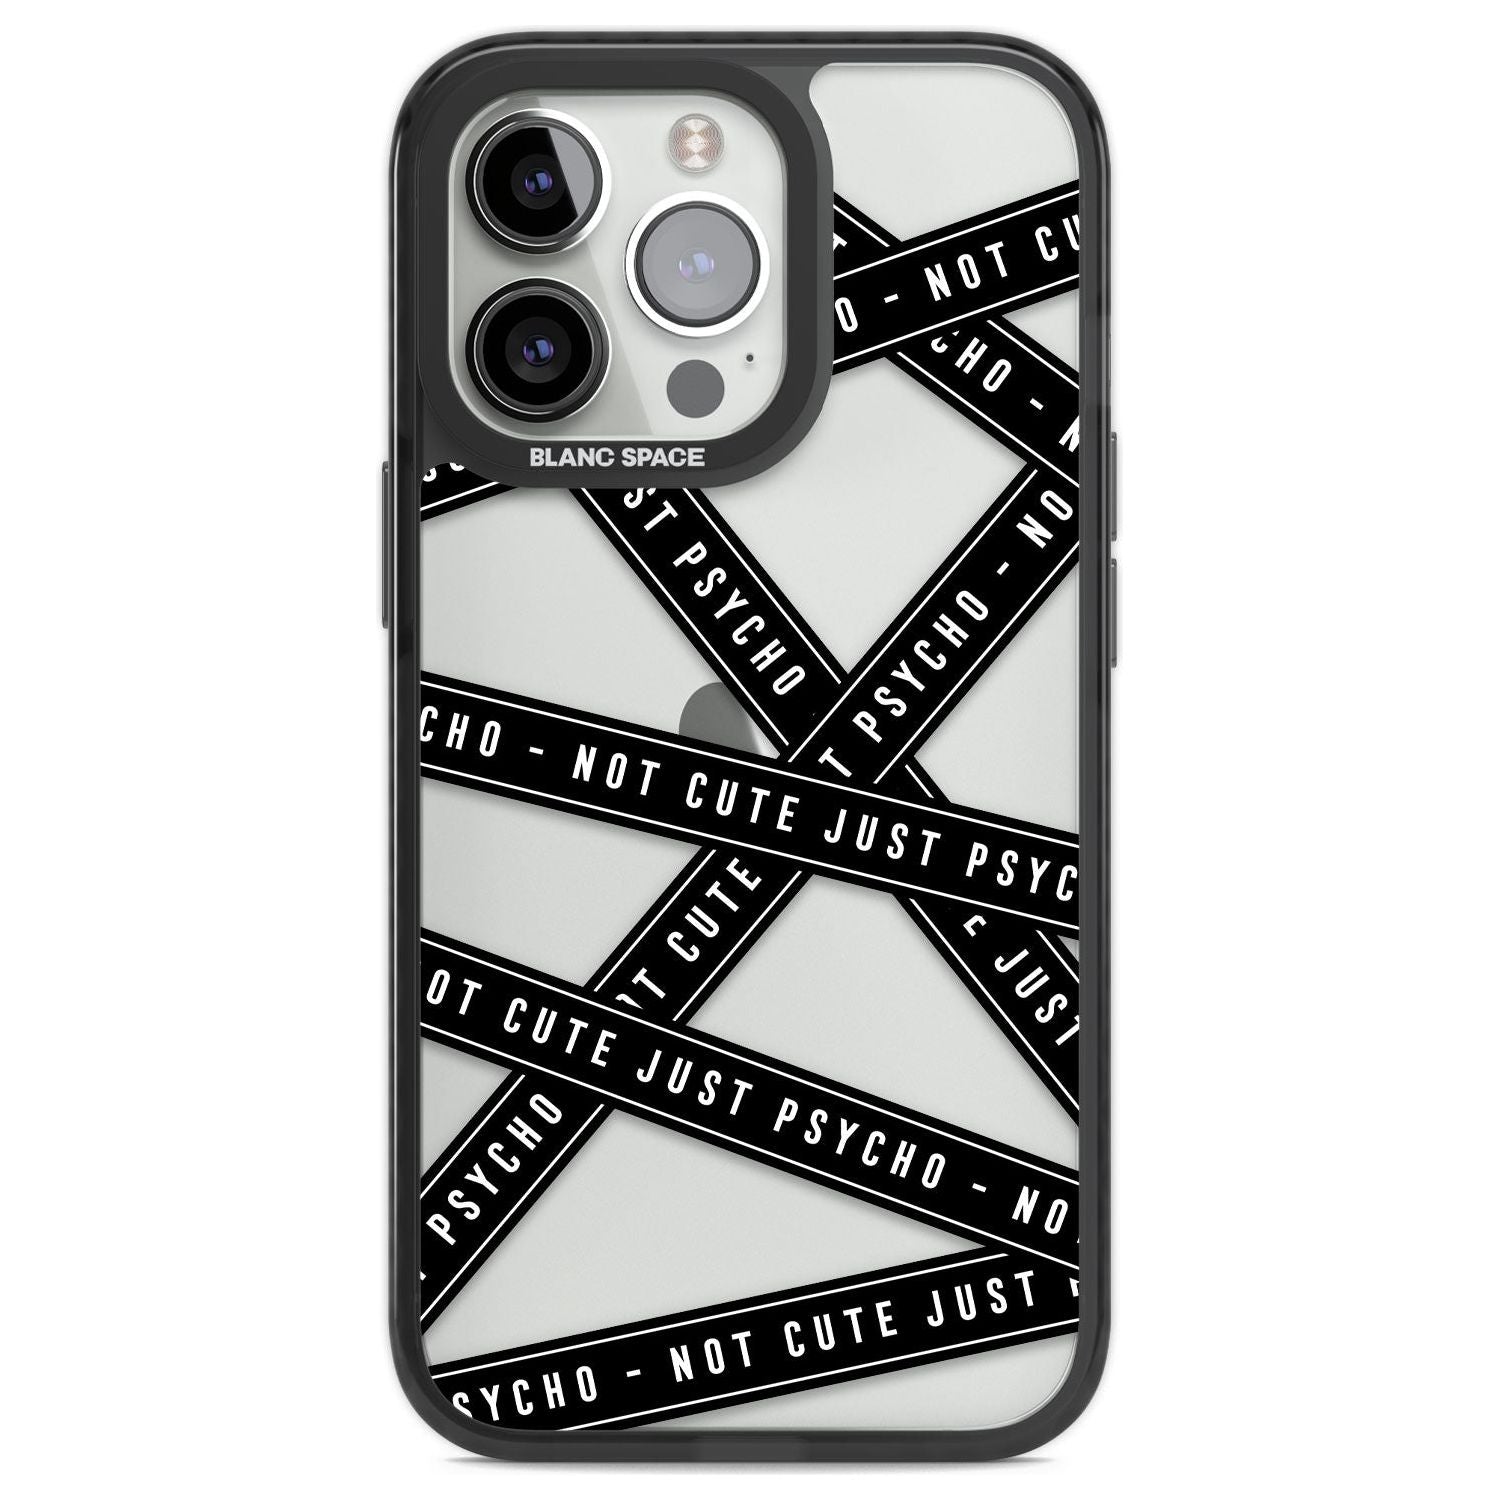 Caution Tape (Clear) Not Cute Just Psycho Phone Case iPhone 13 Pro / Black Impact Case,iPhone 14 Pro / Black Impact Case,iPhone 15 Pro Max / Black Impact Case,iPhone 15 Pro / Black Impact Case Blanc Space